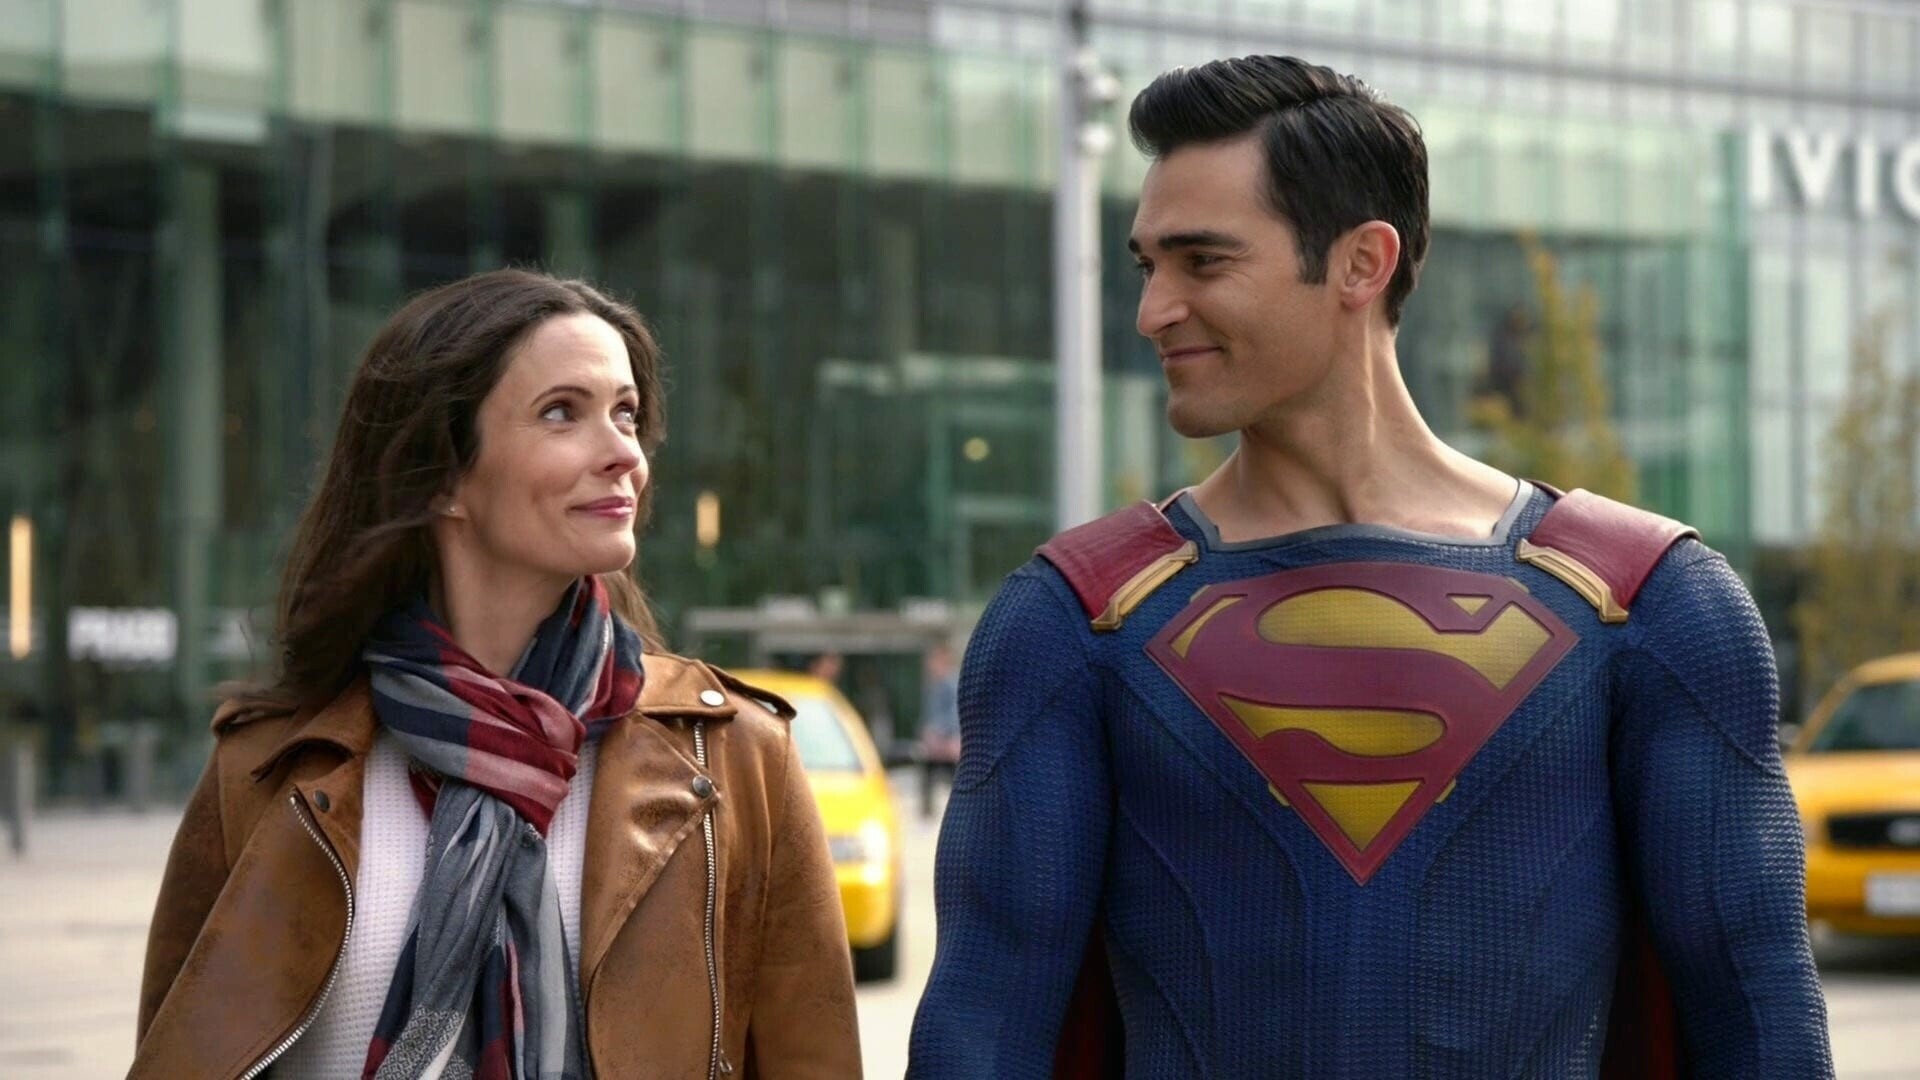 Superman and Lois (TV Series): The series stars Tyler Hoechlin and Elizabeth Tulloch in the title roles. 1920x1080 Full HD Background.